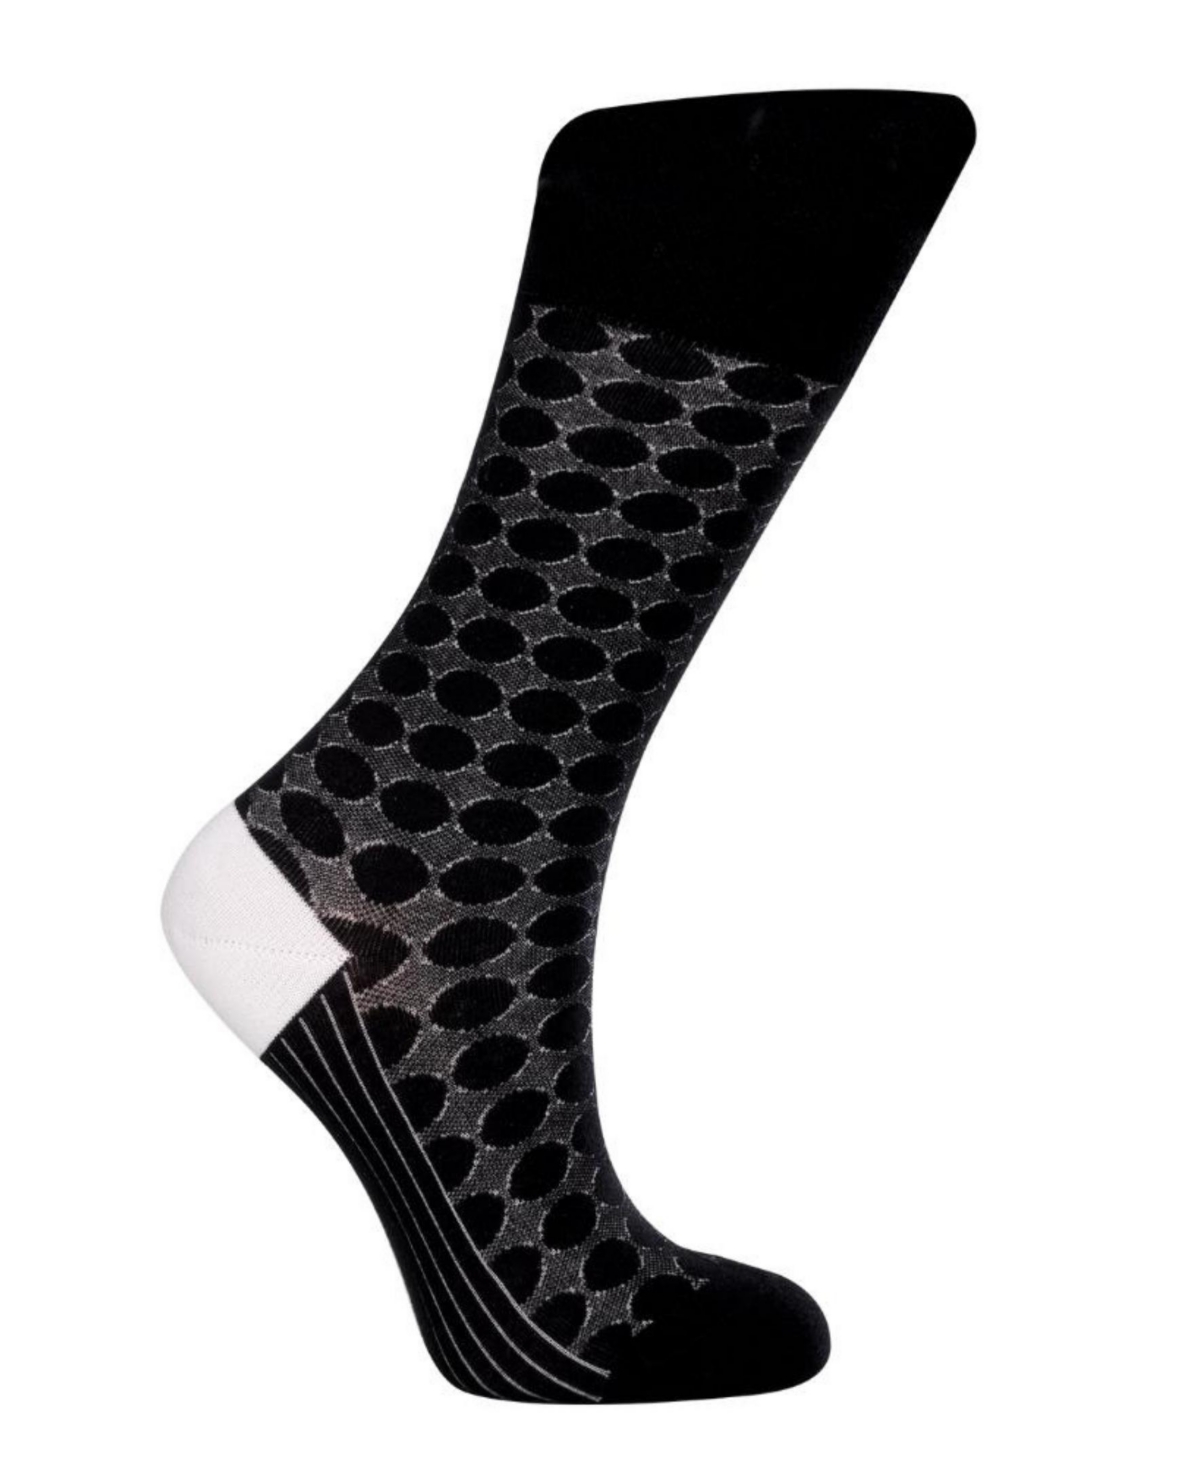 Women's Circles W-Cotton Dress Socks with Seamless Toe Design, Pack of 1 - Black